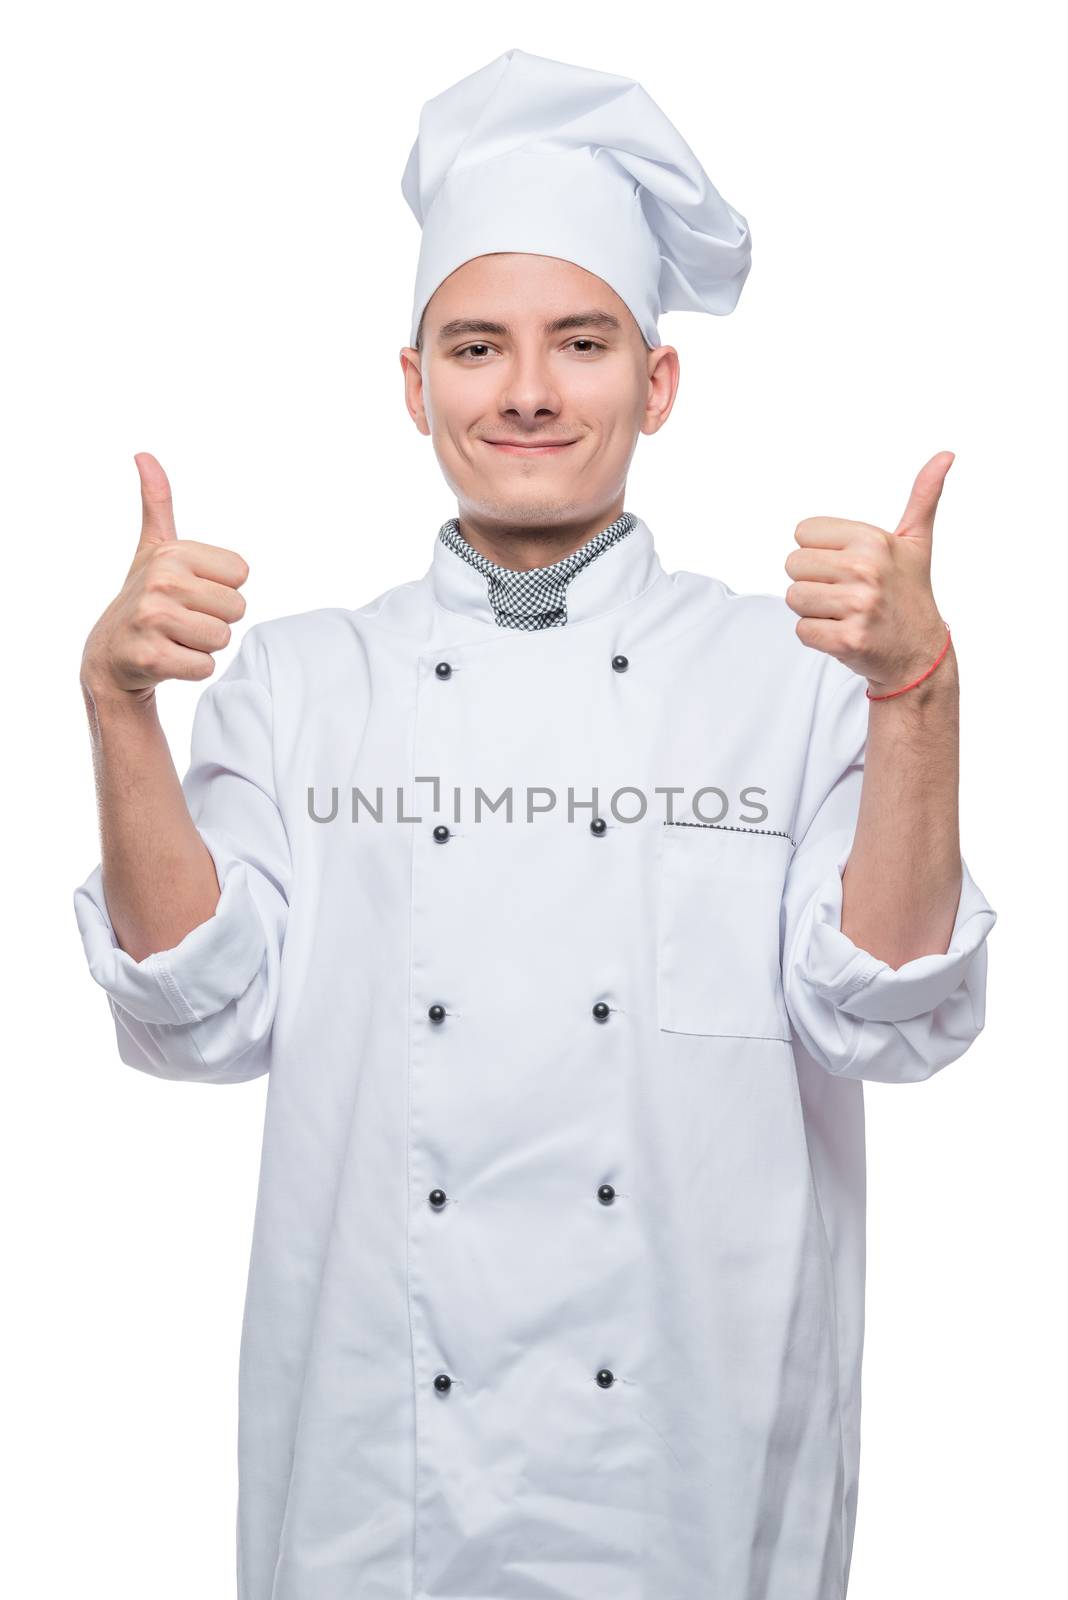 chef with raised fingers, portrait on white background isolated